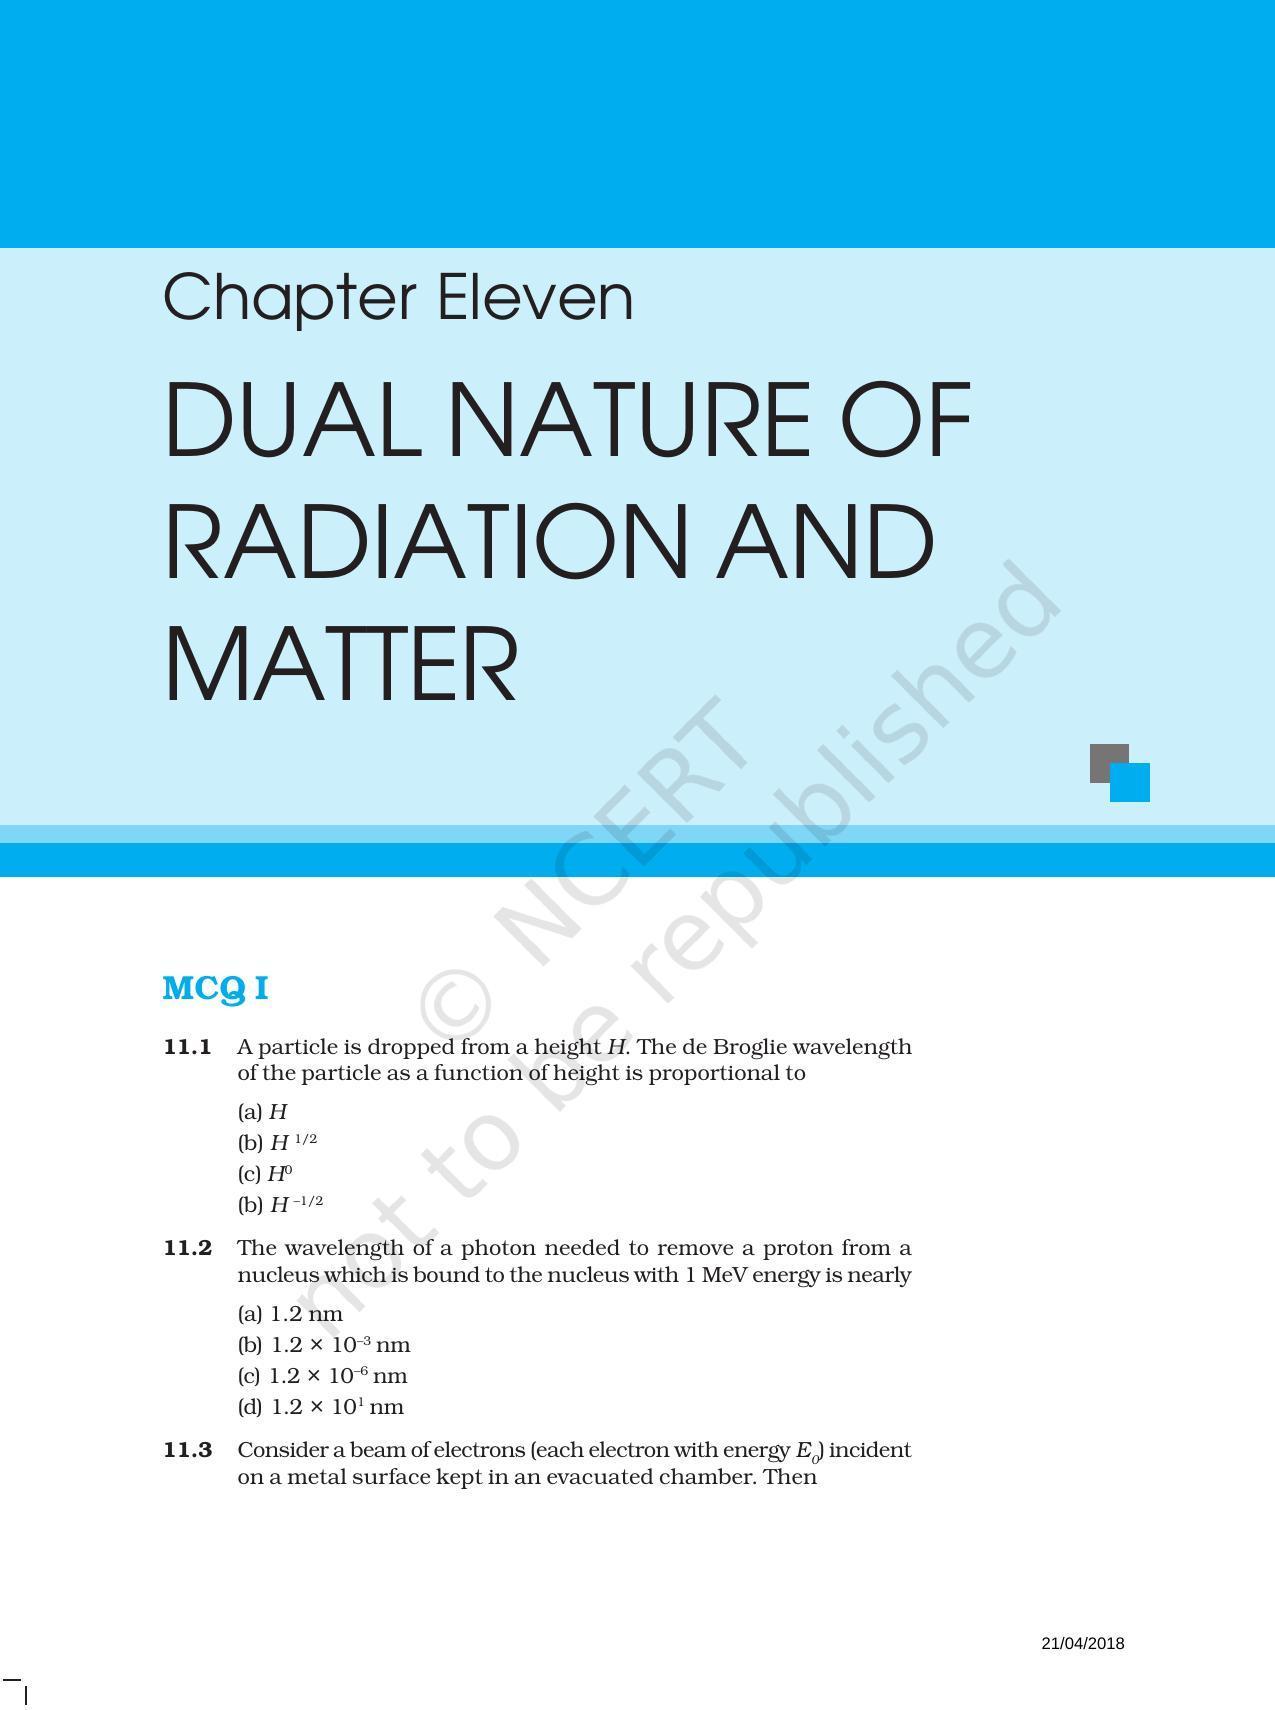 NCERT Exemplar Book for Class 12 Physics: Chapter 11 Dual Nature of Radiation and Matter - Page 1